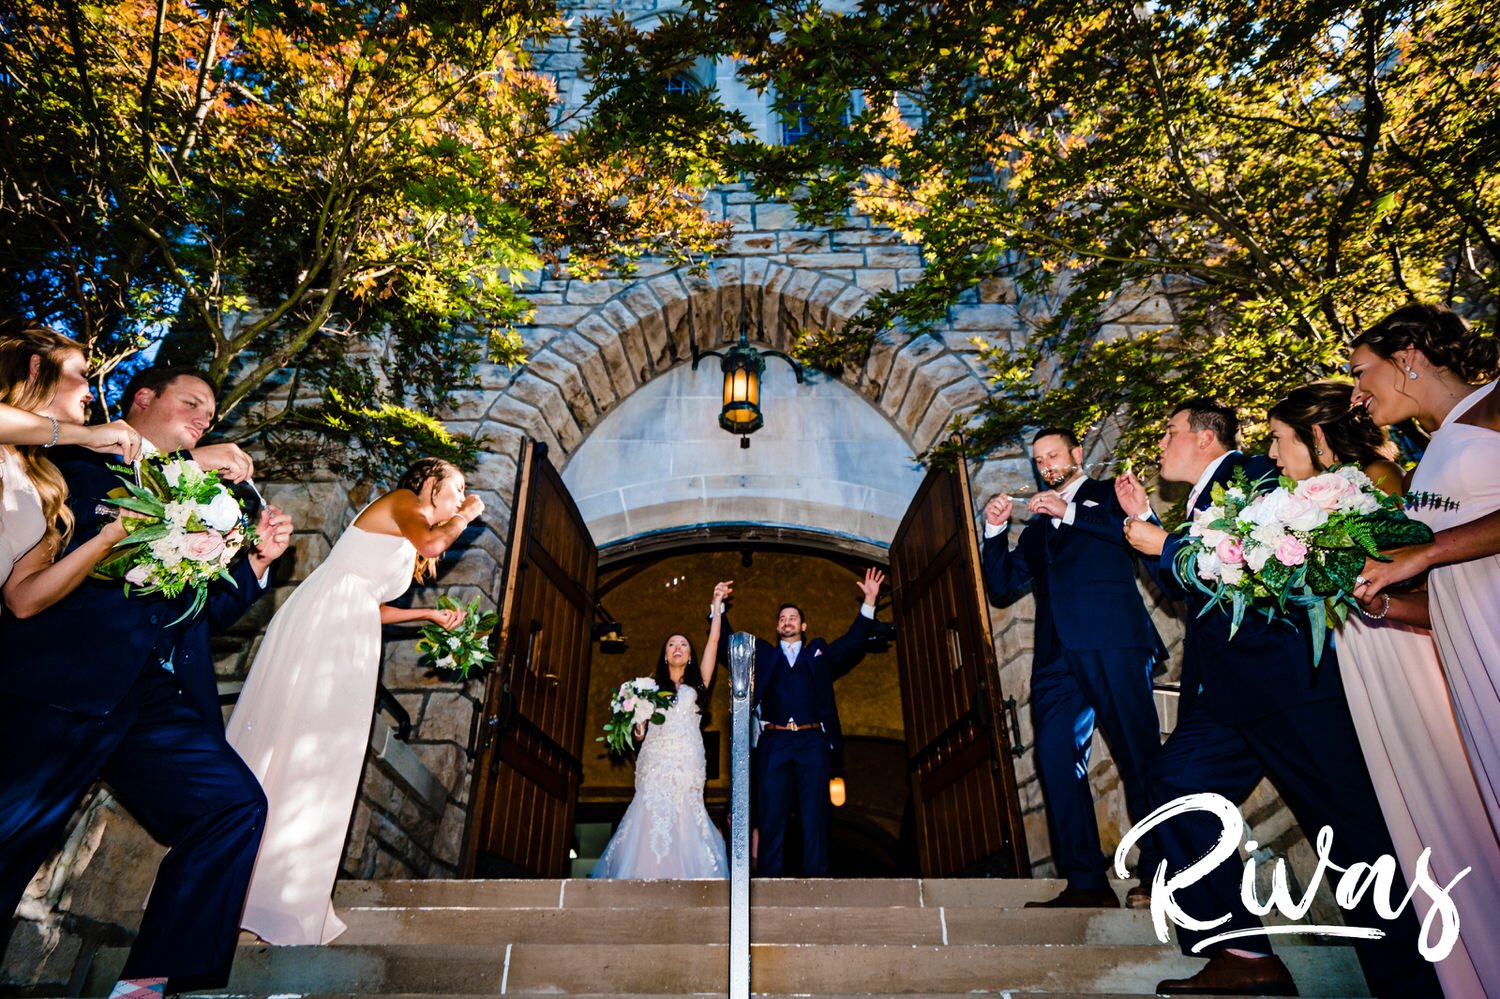 A candid picture, taken from the front of the church of a bride and groom holding hands in celebration as they walk down the stairs to a flurry of bubbles after their wedding ceremony. 